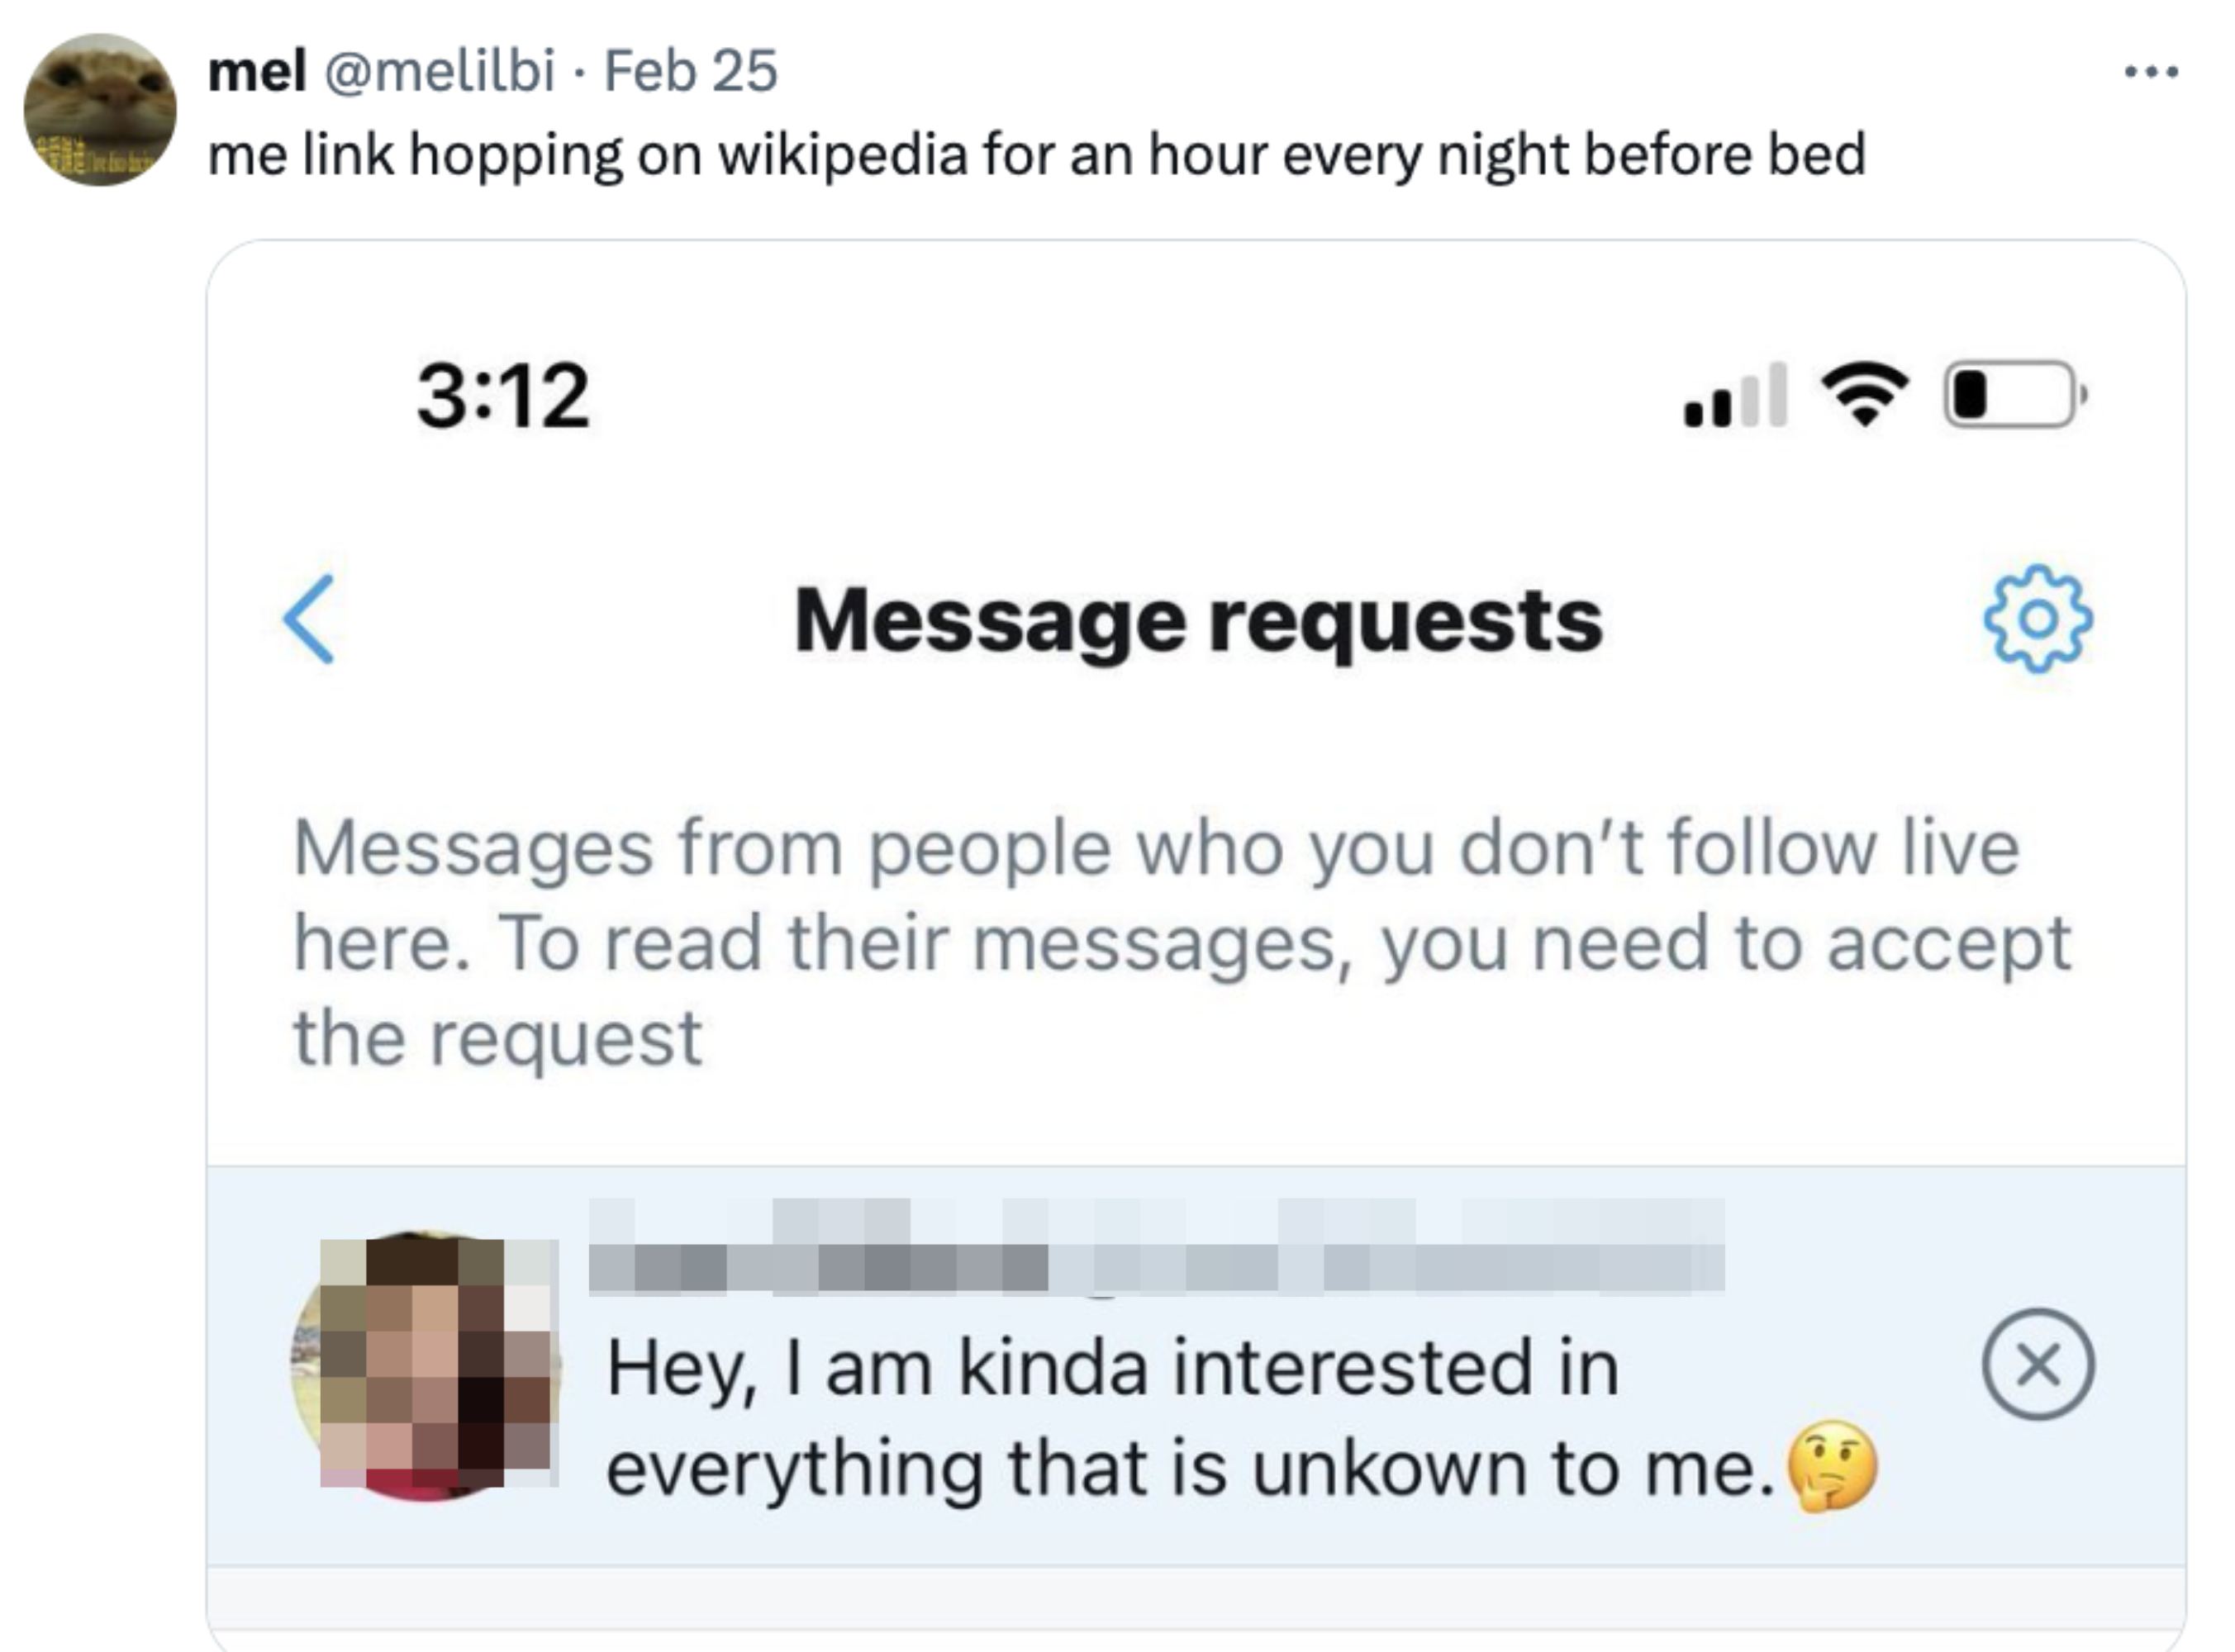 A screenshot of a tweet by mel @meliblib about browsing Wikipedia before bed, showing a message request notification preview from Lee Clifford